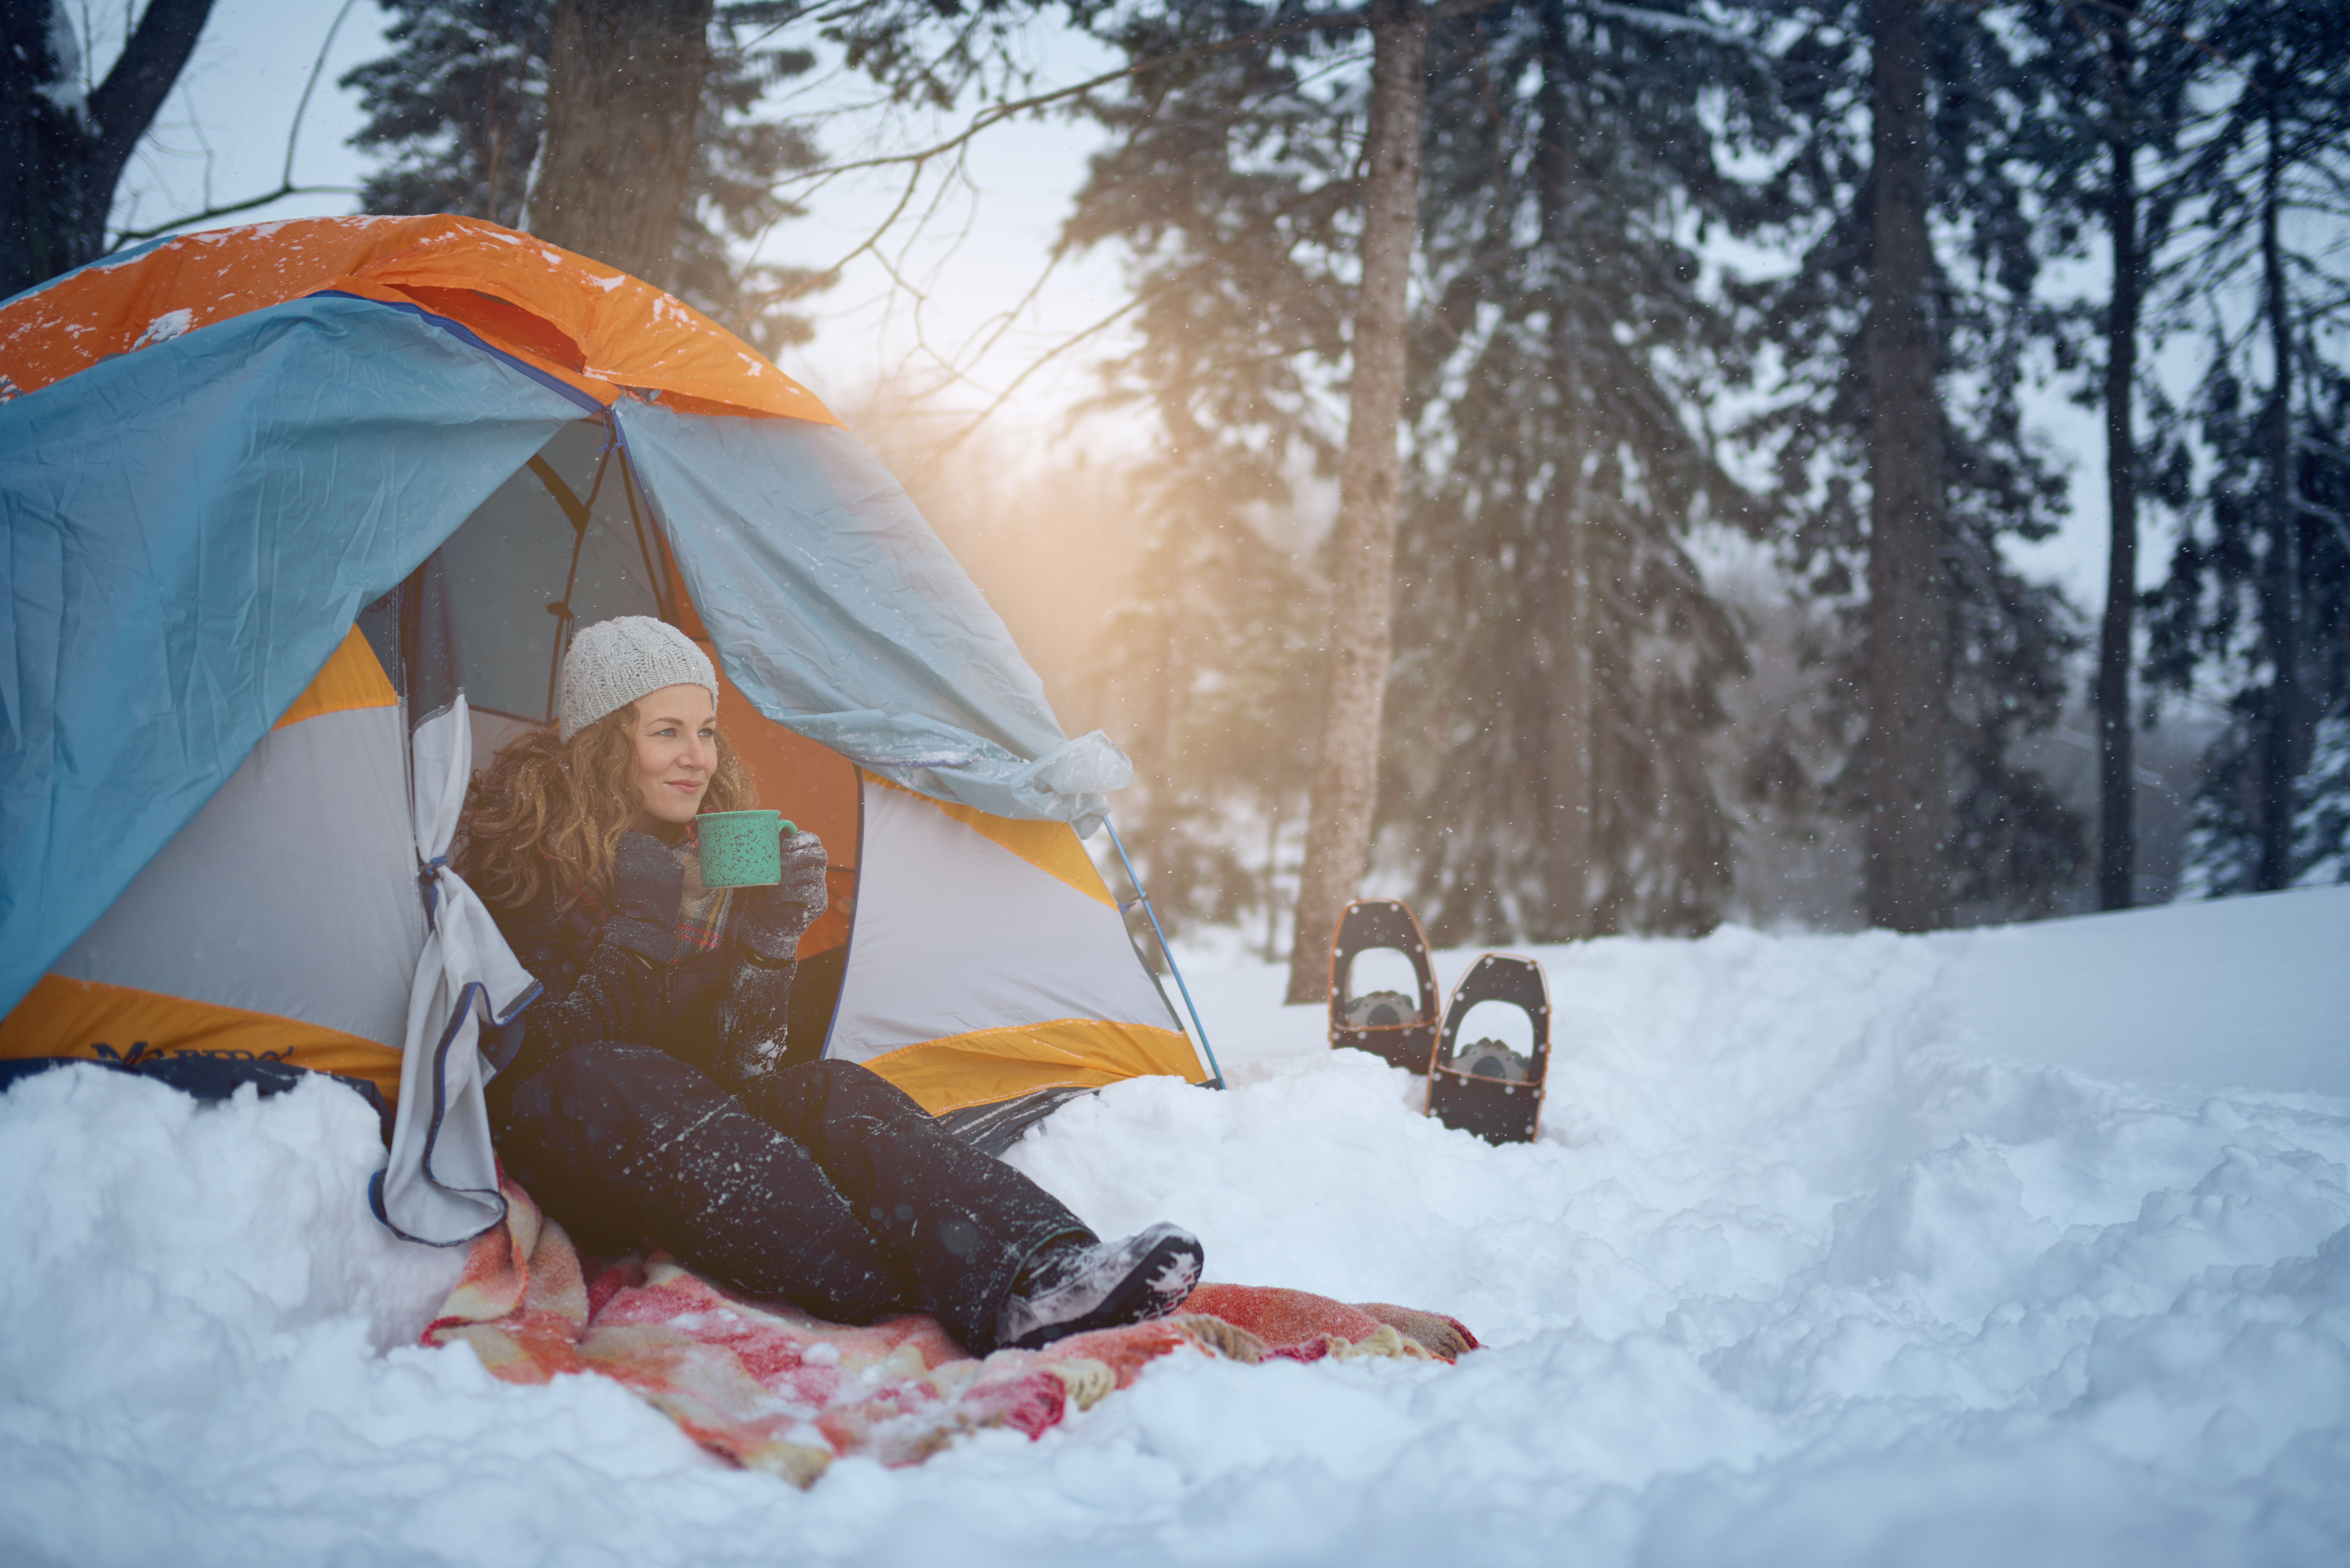 Ontario winter camping ideas that outdoor lovers should know about -  Newmarket News